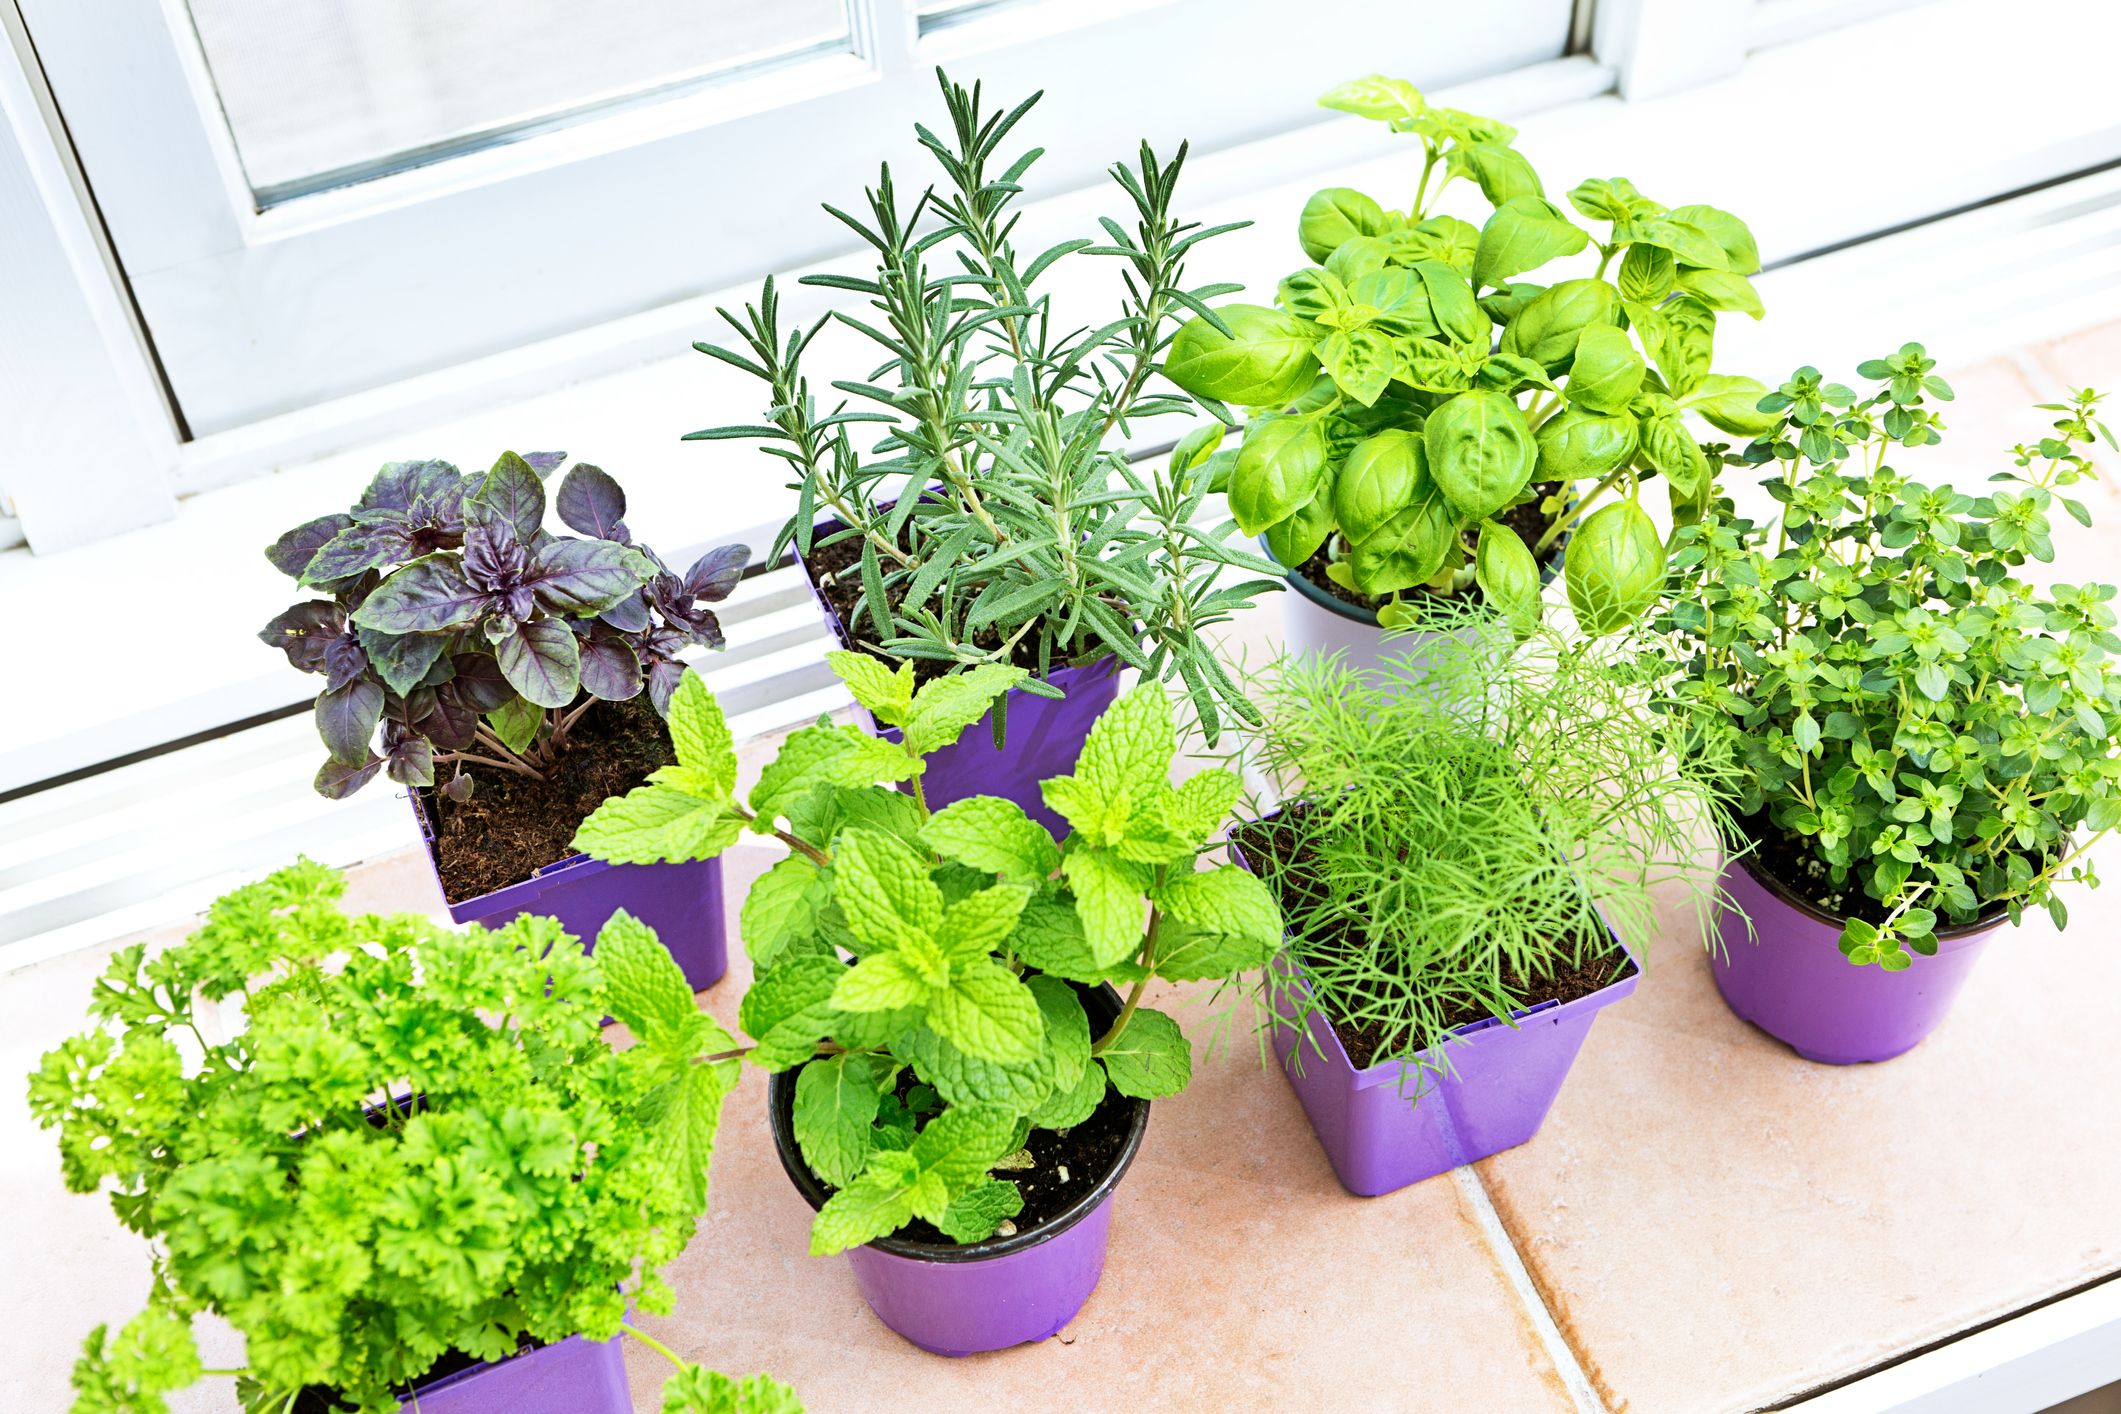 8 Best Vegetables to Grow at Home - Garden Dust